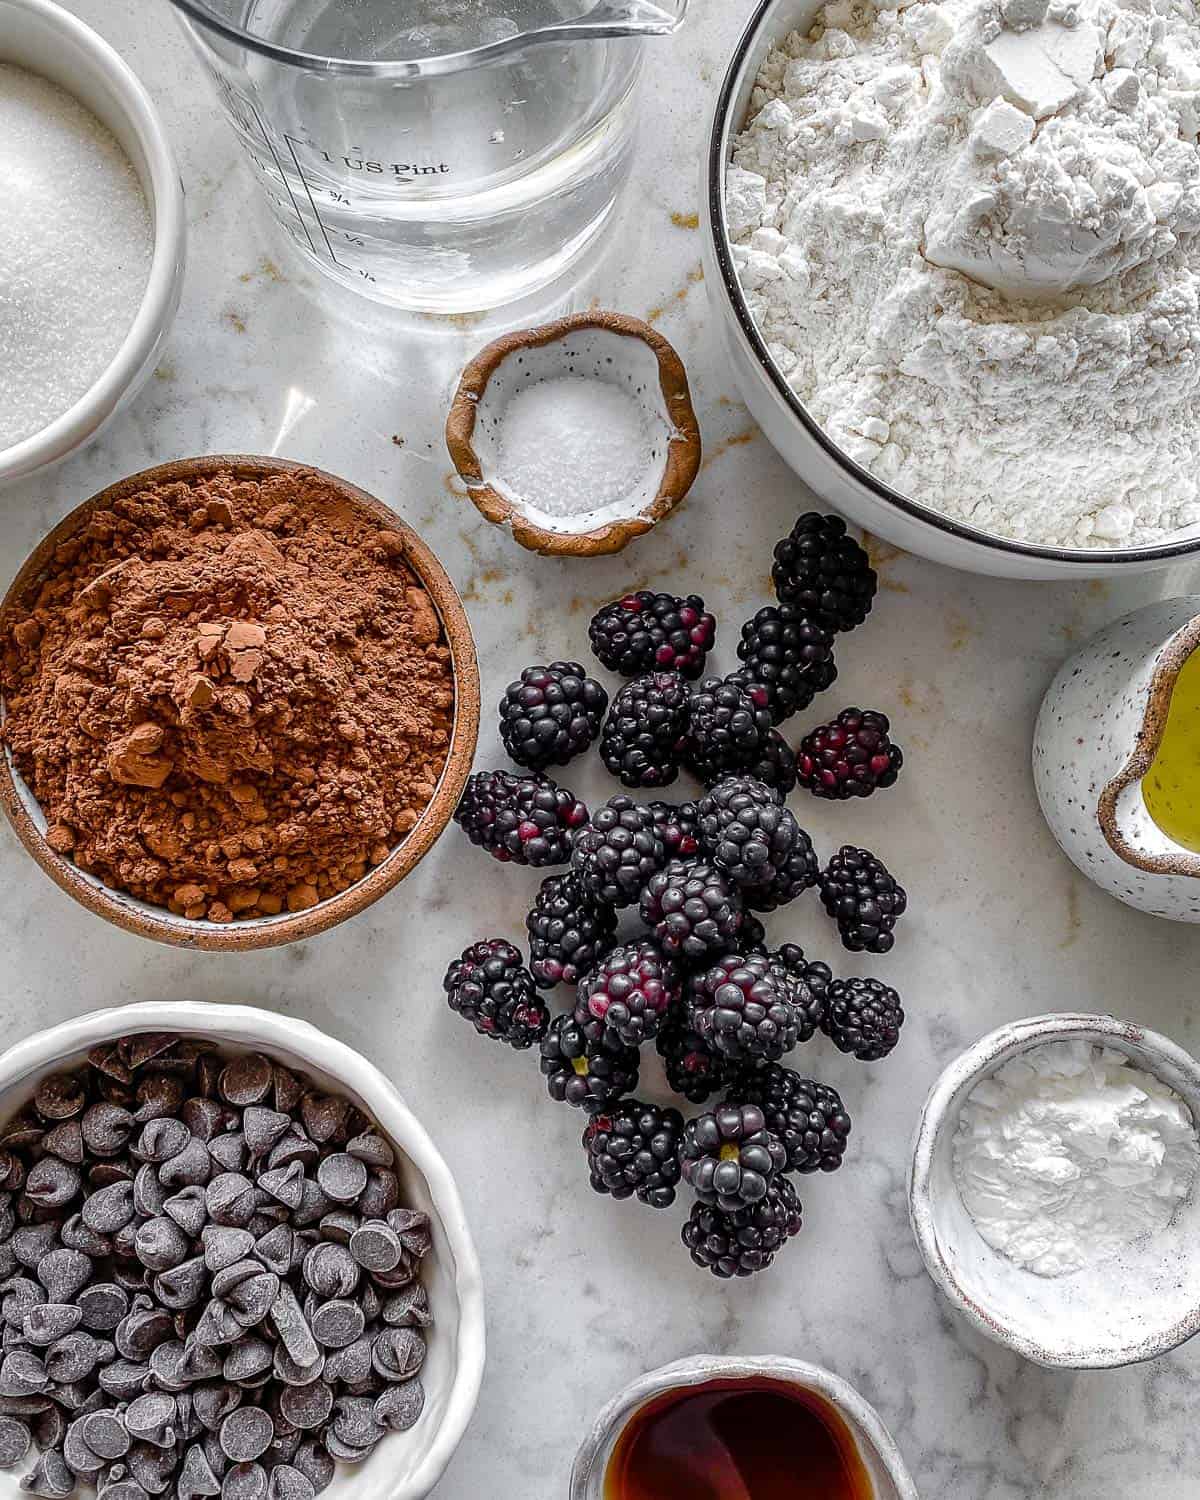 ingredients for Blackberry Chocolate Cupcakes measured out against white surface